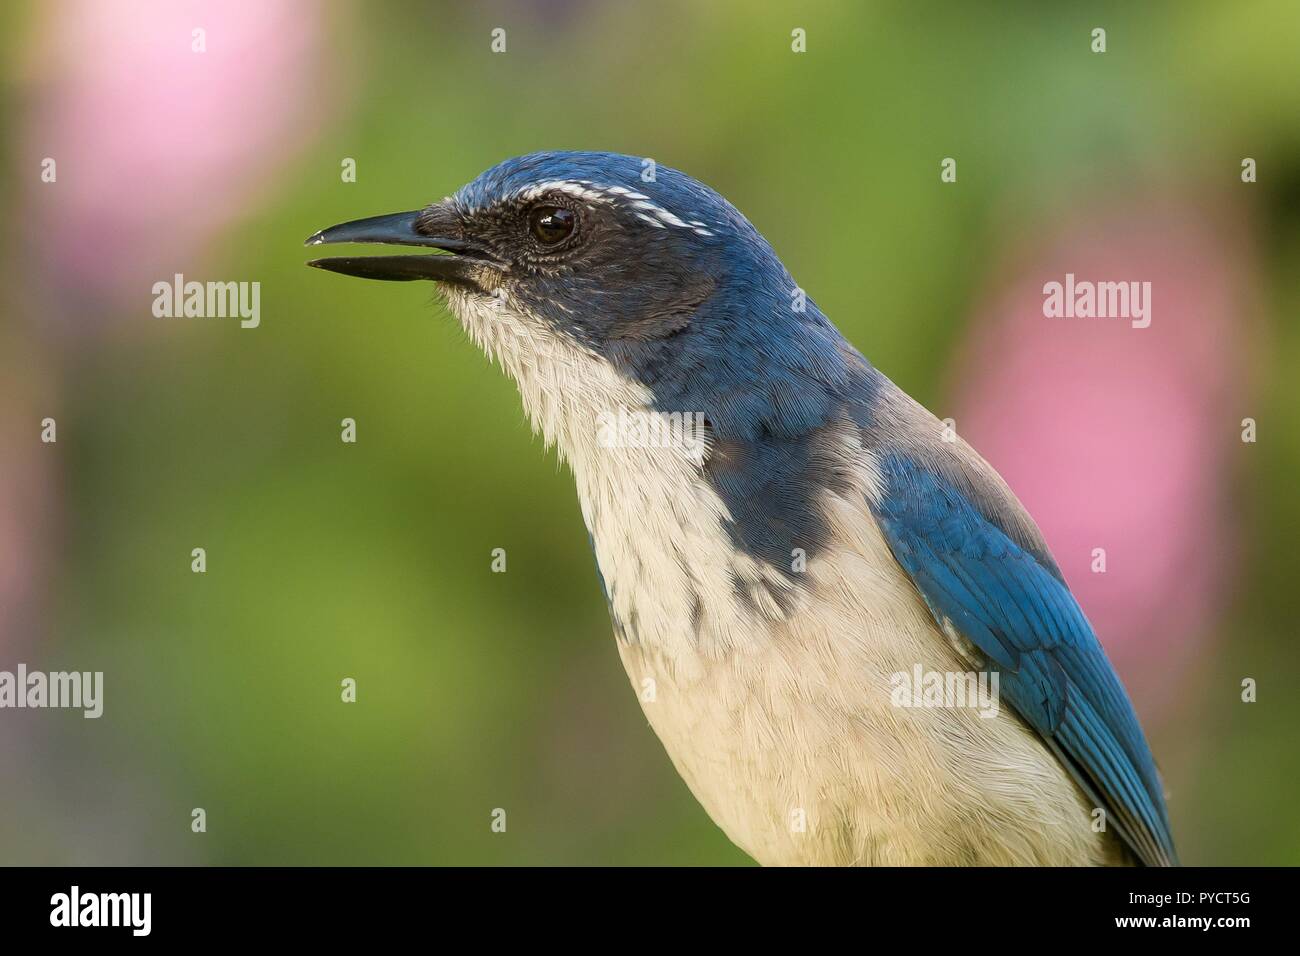 American Blue jay bird (Cyanocitta cristata) up close with its beak open. Blurred pink and green background. Stock Photo